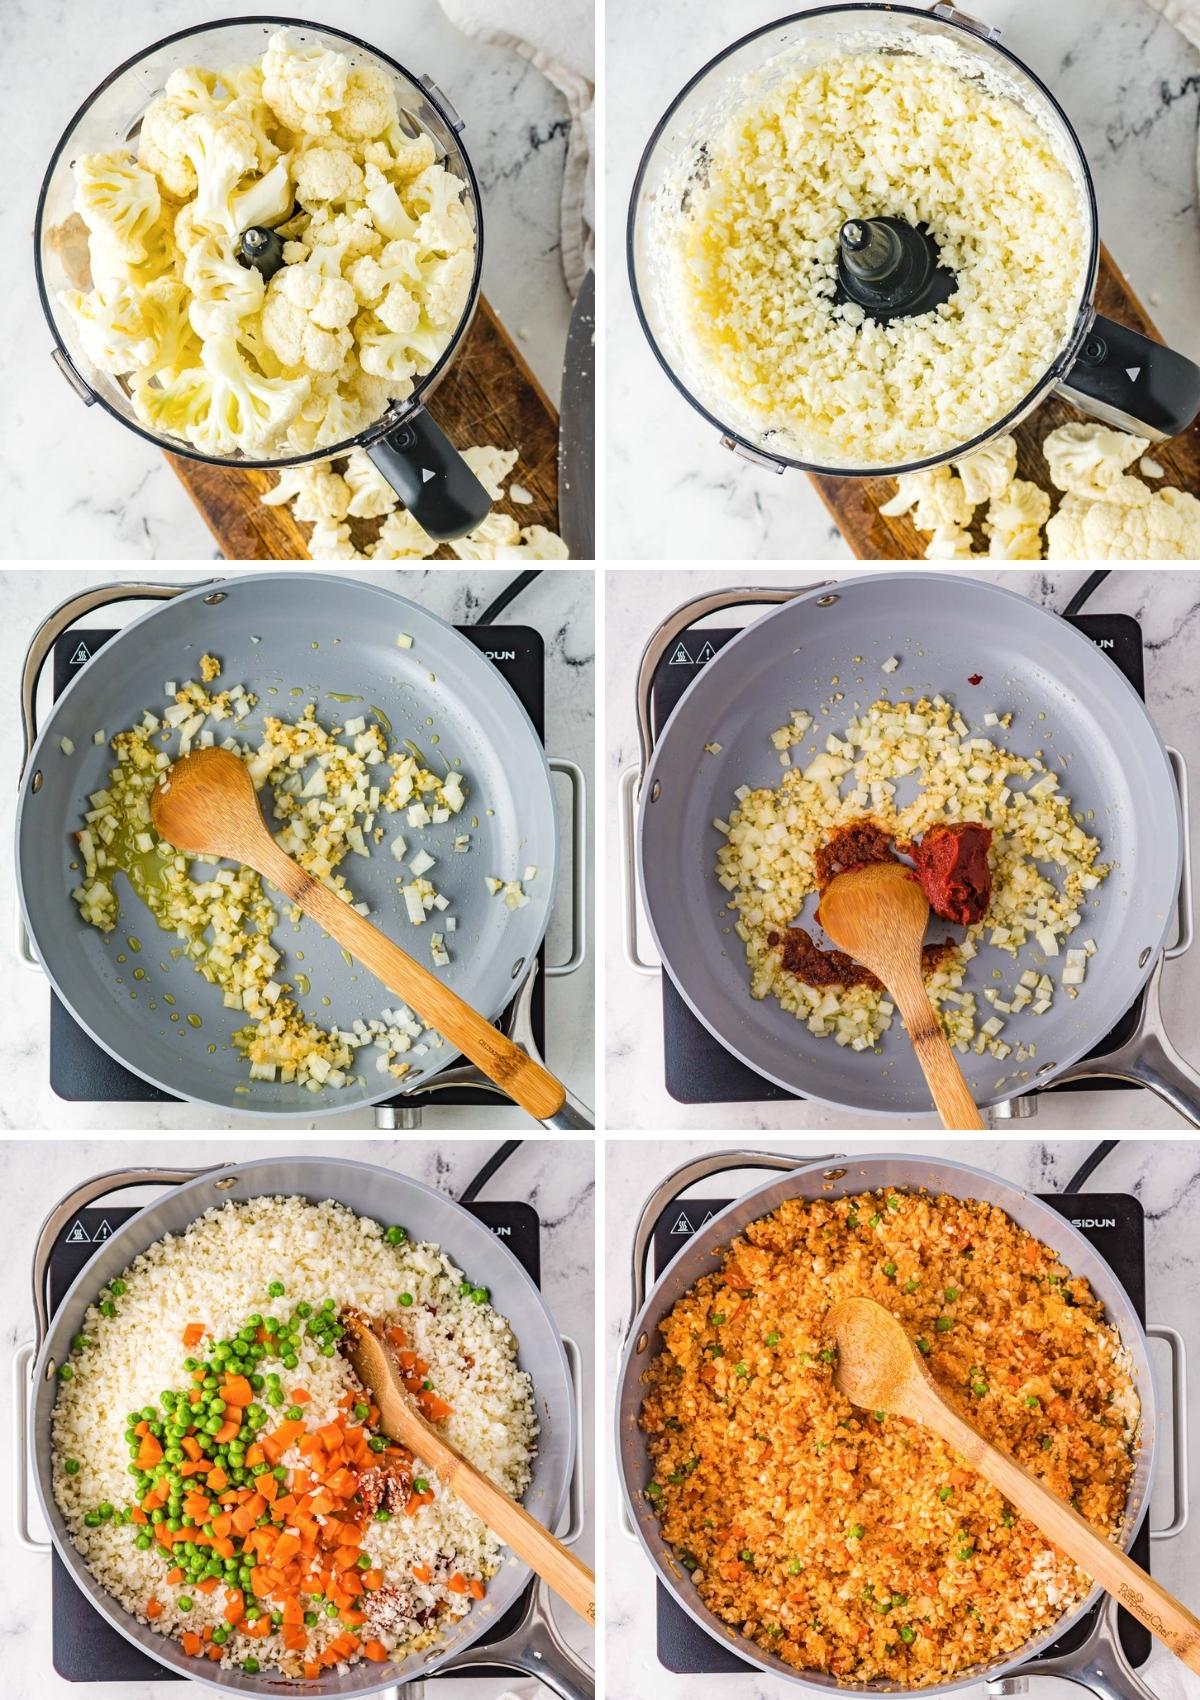 directions for making Mexican cauliflower rice, including ricing the cauliflower in a food processor and simmering with tomato paste, garlic, peas and carrot